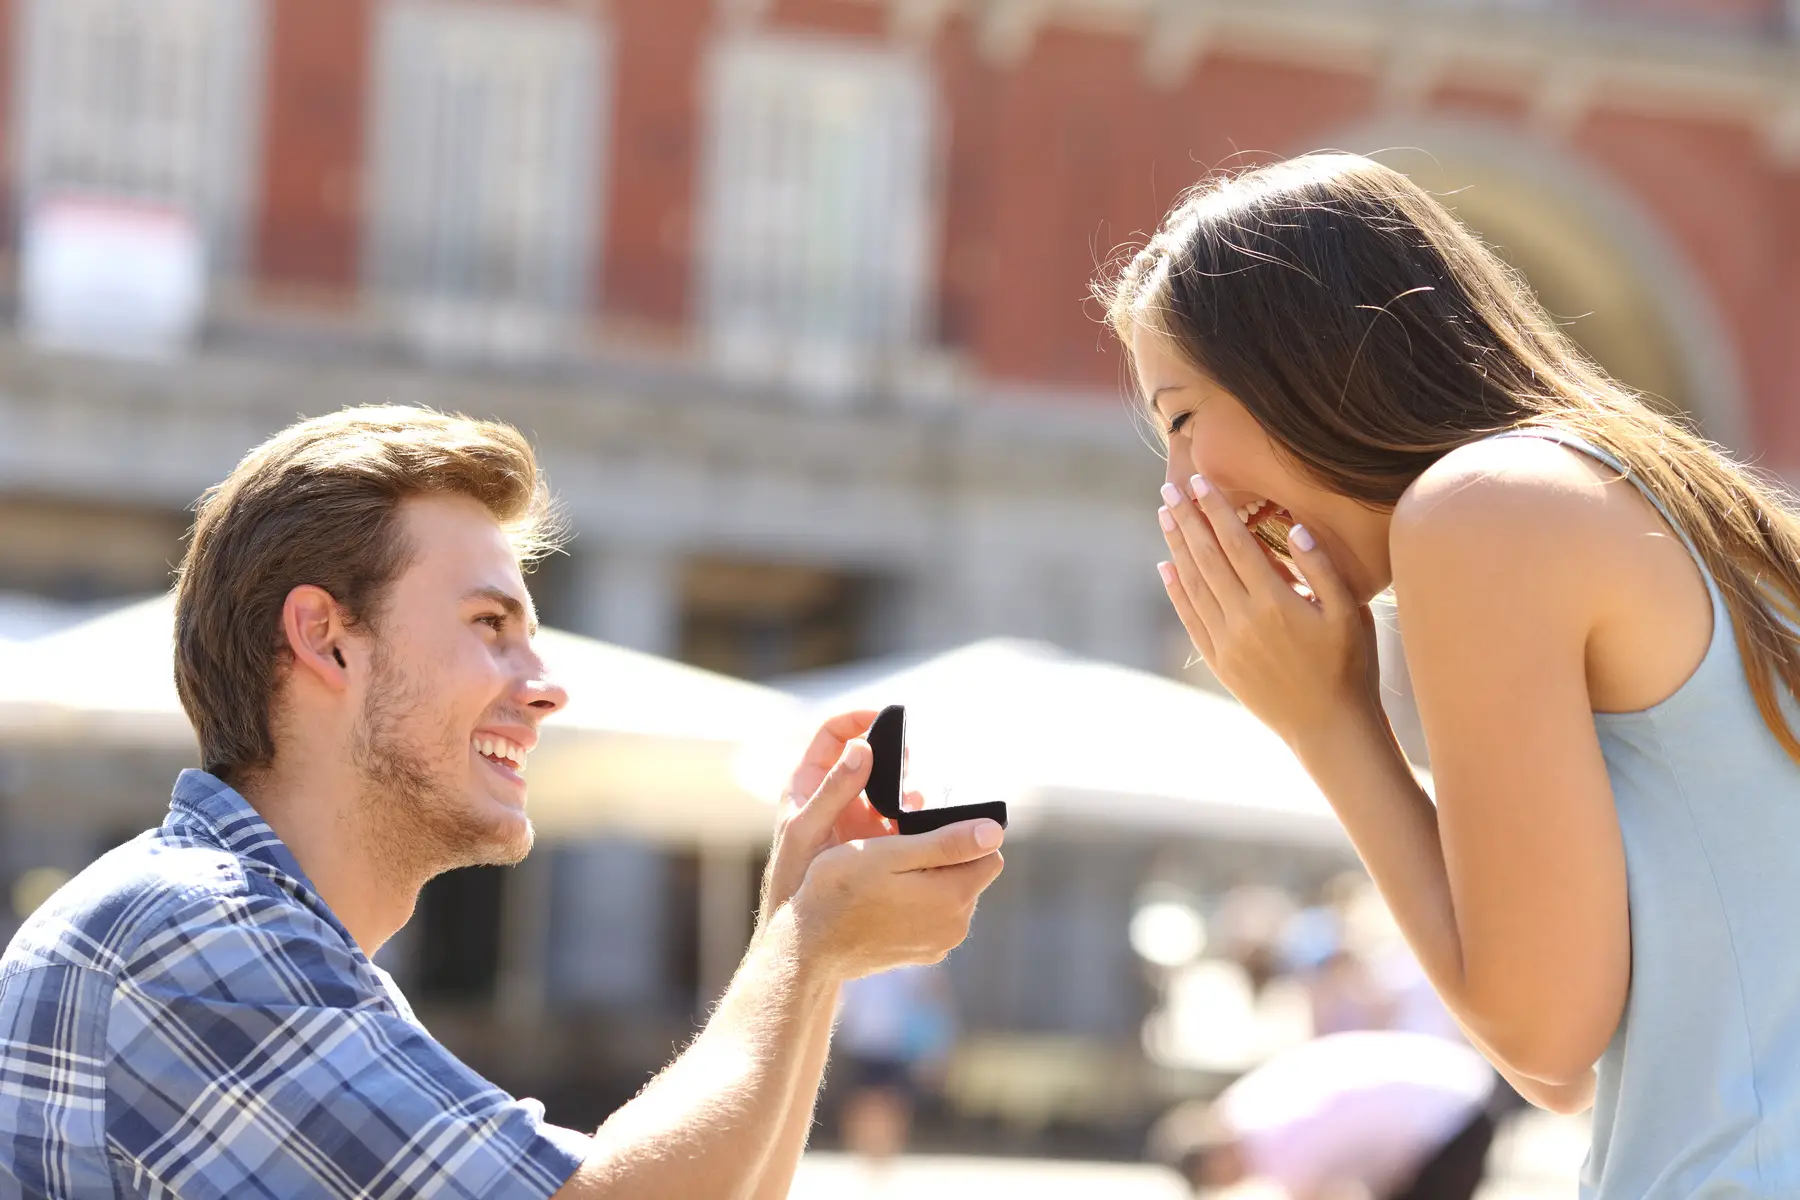 Man proposing on a city square